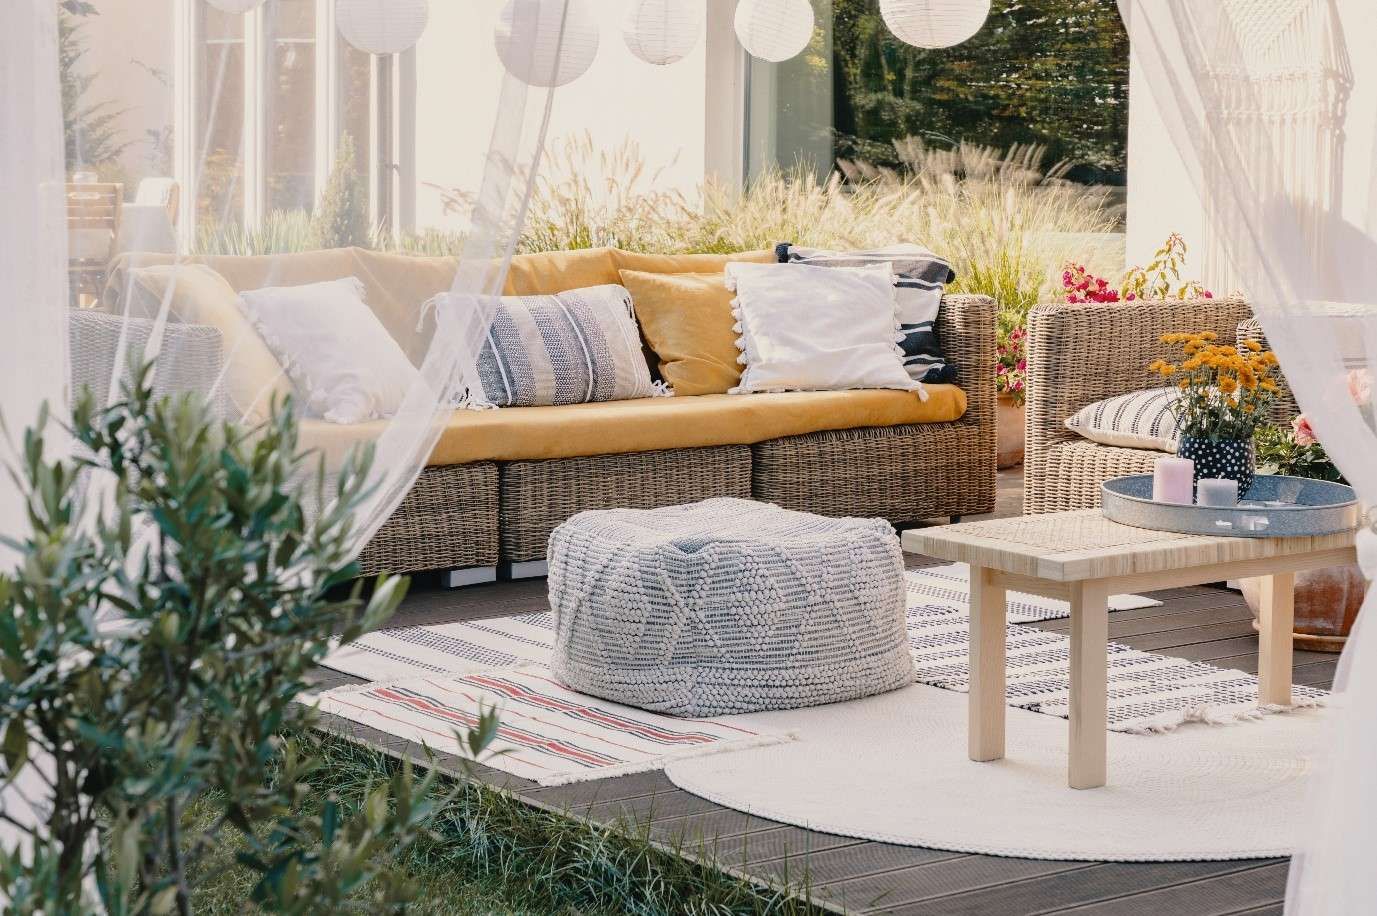 In 4 Schritten zum Traumgarten Press profile homify モダンデザインの テラス Plant, Table, Furniture, Comfort, Interior design, Outdoor furniture, Rectangle, Coffee table, Wood, Decoration